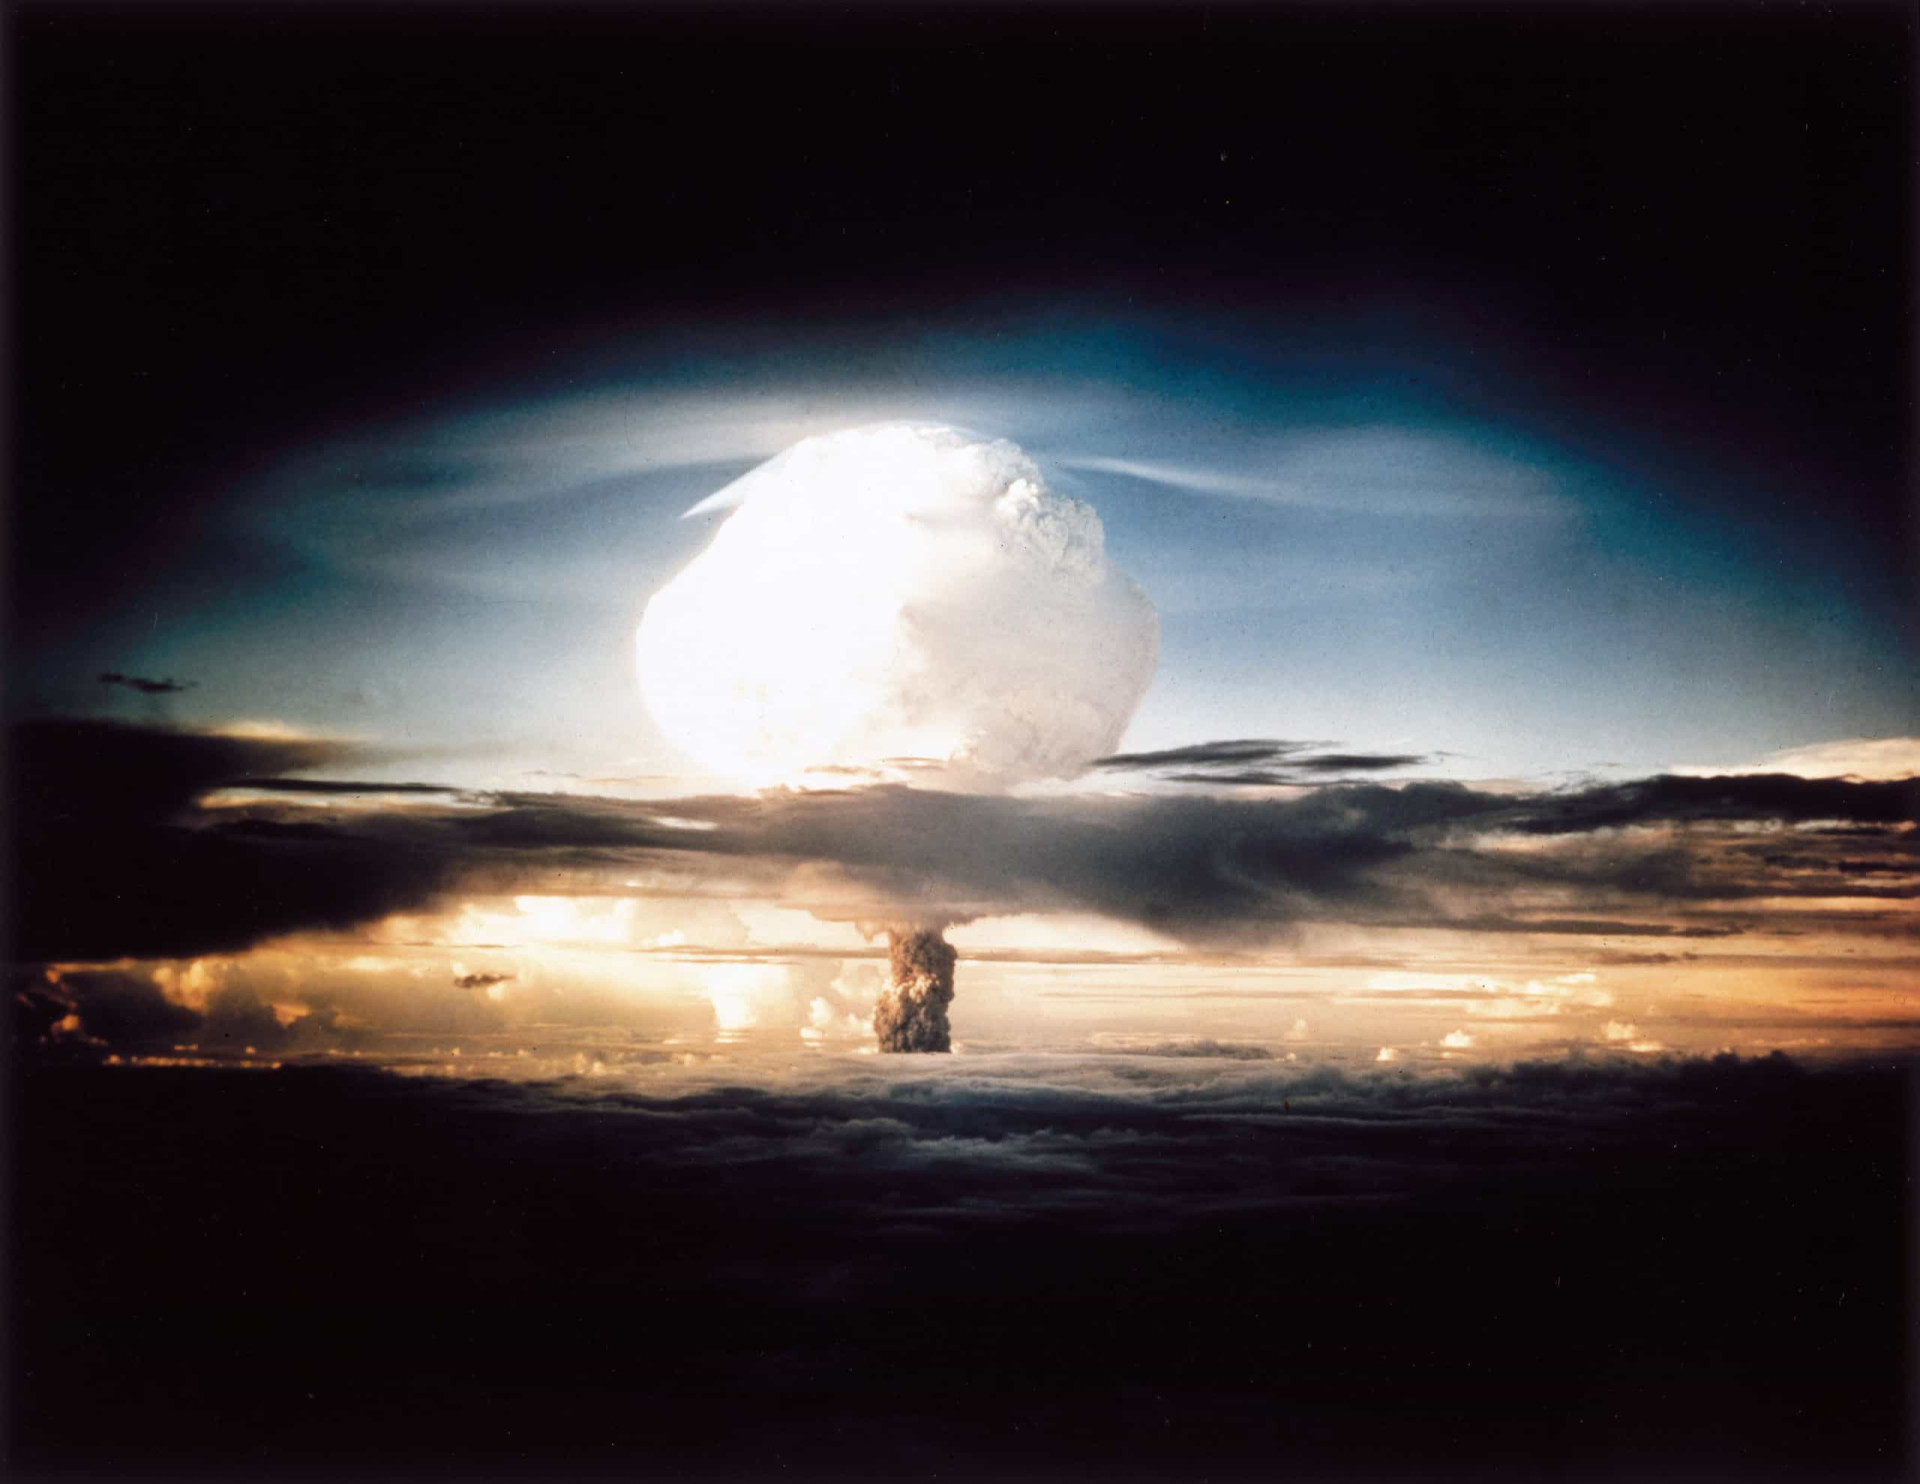 <p>The United States tests its first thermonuclear device, in November 1952 at Eniwetok Atoll in the Pacific Proving Ground in the Marshall Islands, as part of Operation Ivy. The USSR responds with a similar test in August 1953. This remained the clock's closest approach to midnight (tied in 2018) until 2020.</p><p>You may also like:<a href="https://www.starsinsider.com/n/263077?utm_source=msn.com&utm_medium=display&utm_campaign=referral_description&utm_content=490923v3en-ca"> Celebrities who lost all their money</a></p>